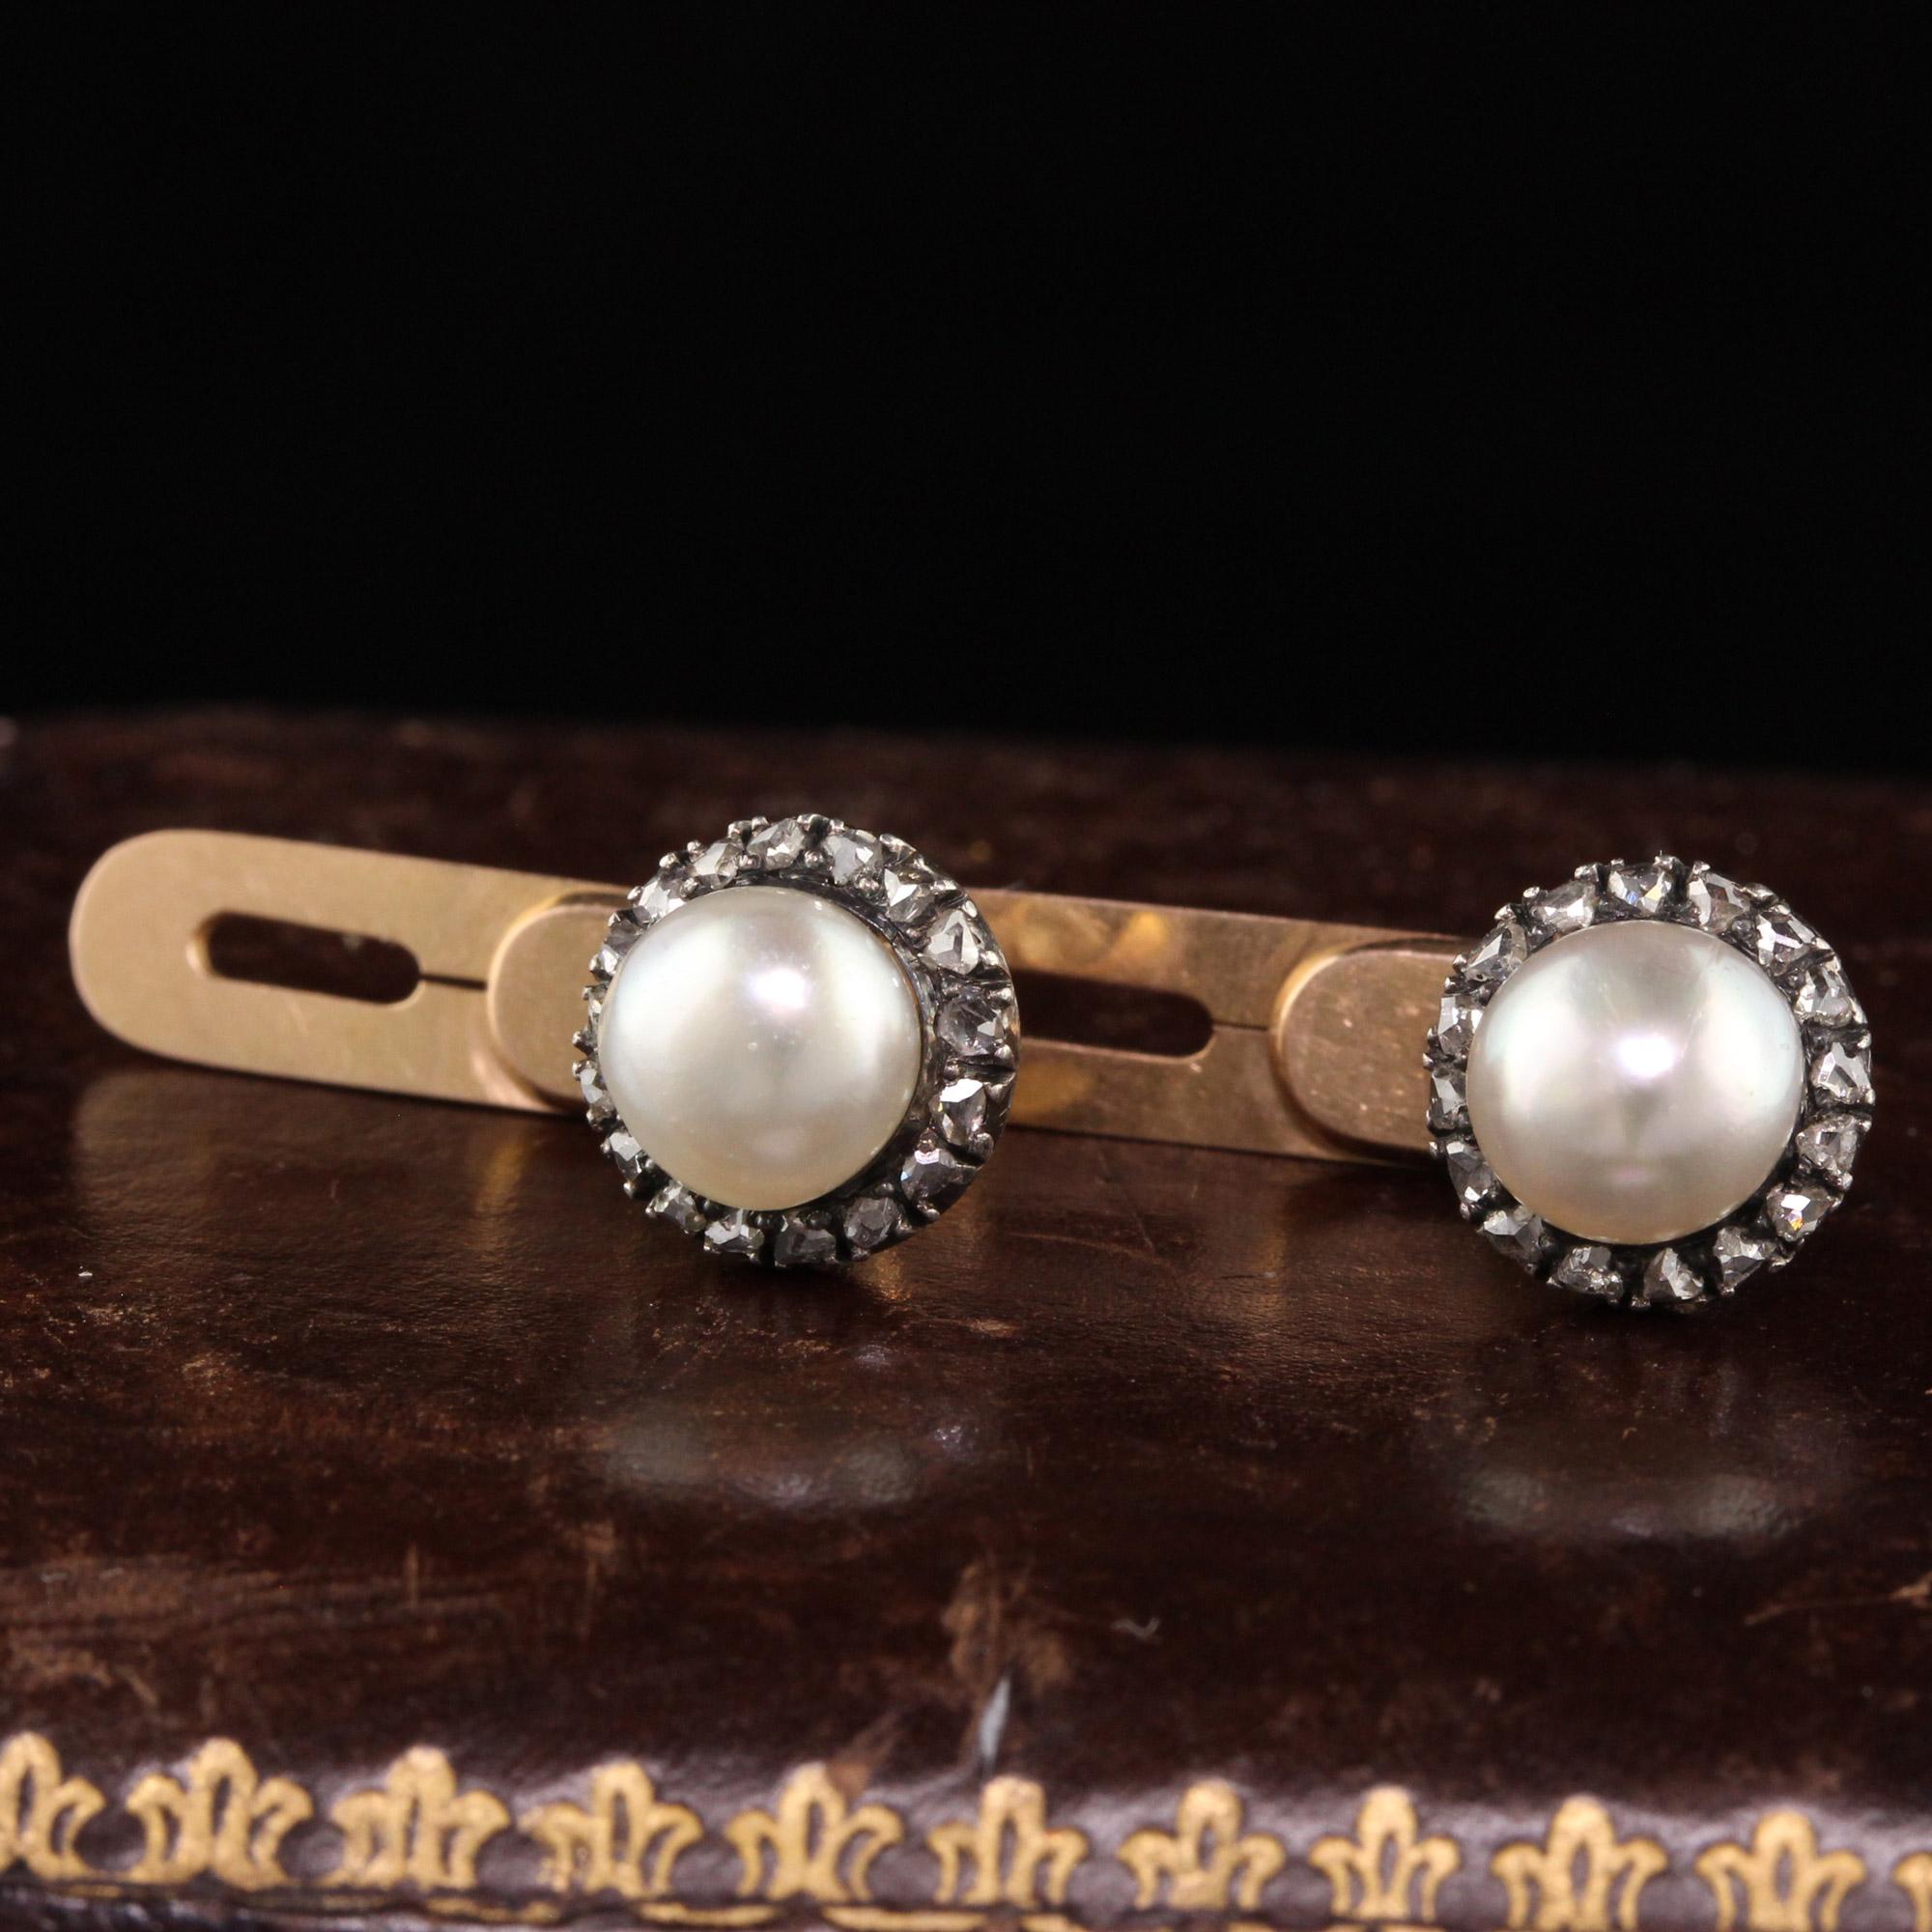 Beautiful Antique Victorian 18K Yellow Gold Silver Top Natural Pearl and Diamond Cufflinks. This gorgeous pair of cufflinks are crafted in 18k yellow gold and silver top. The cufflinks have two natural pearls in the center of each side with rose